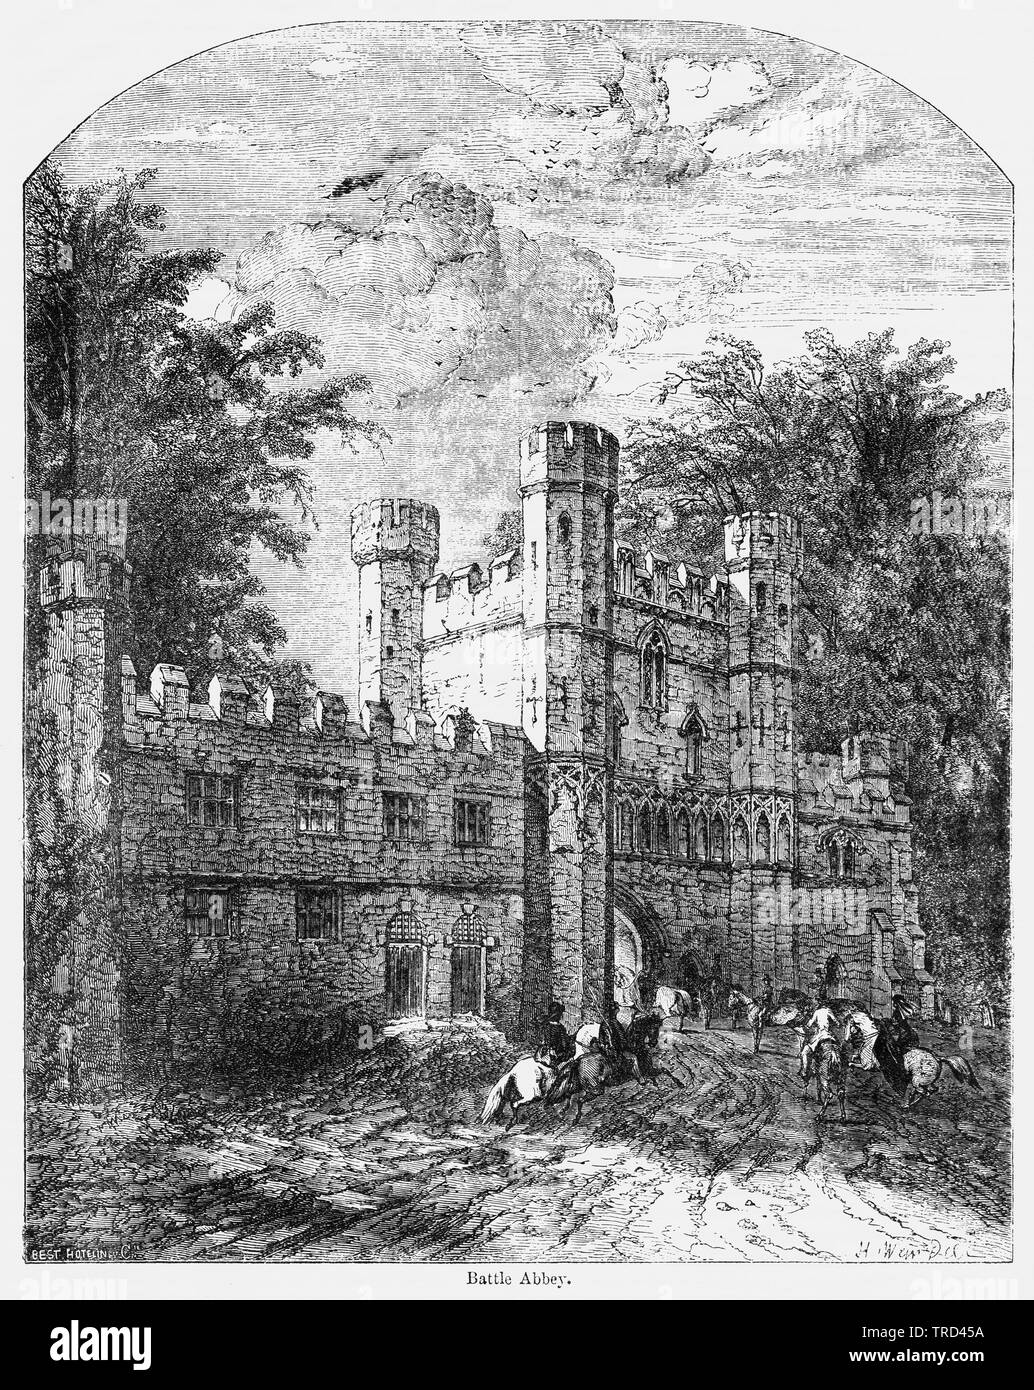 Battle Abbey, Illustration from John Cassell's Illustrated History of England, Vol. I from the earliest period to the reign of Edward the Fourth, Cassell, Petter and Galpin, 1857 Stock Photo